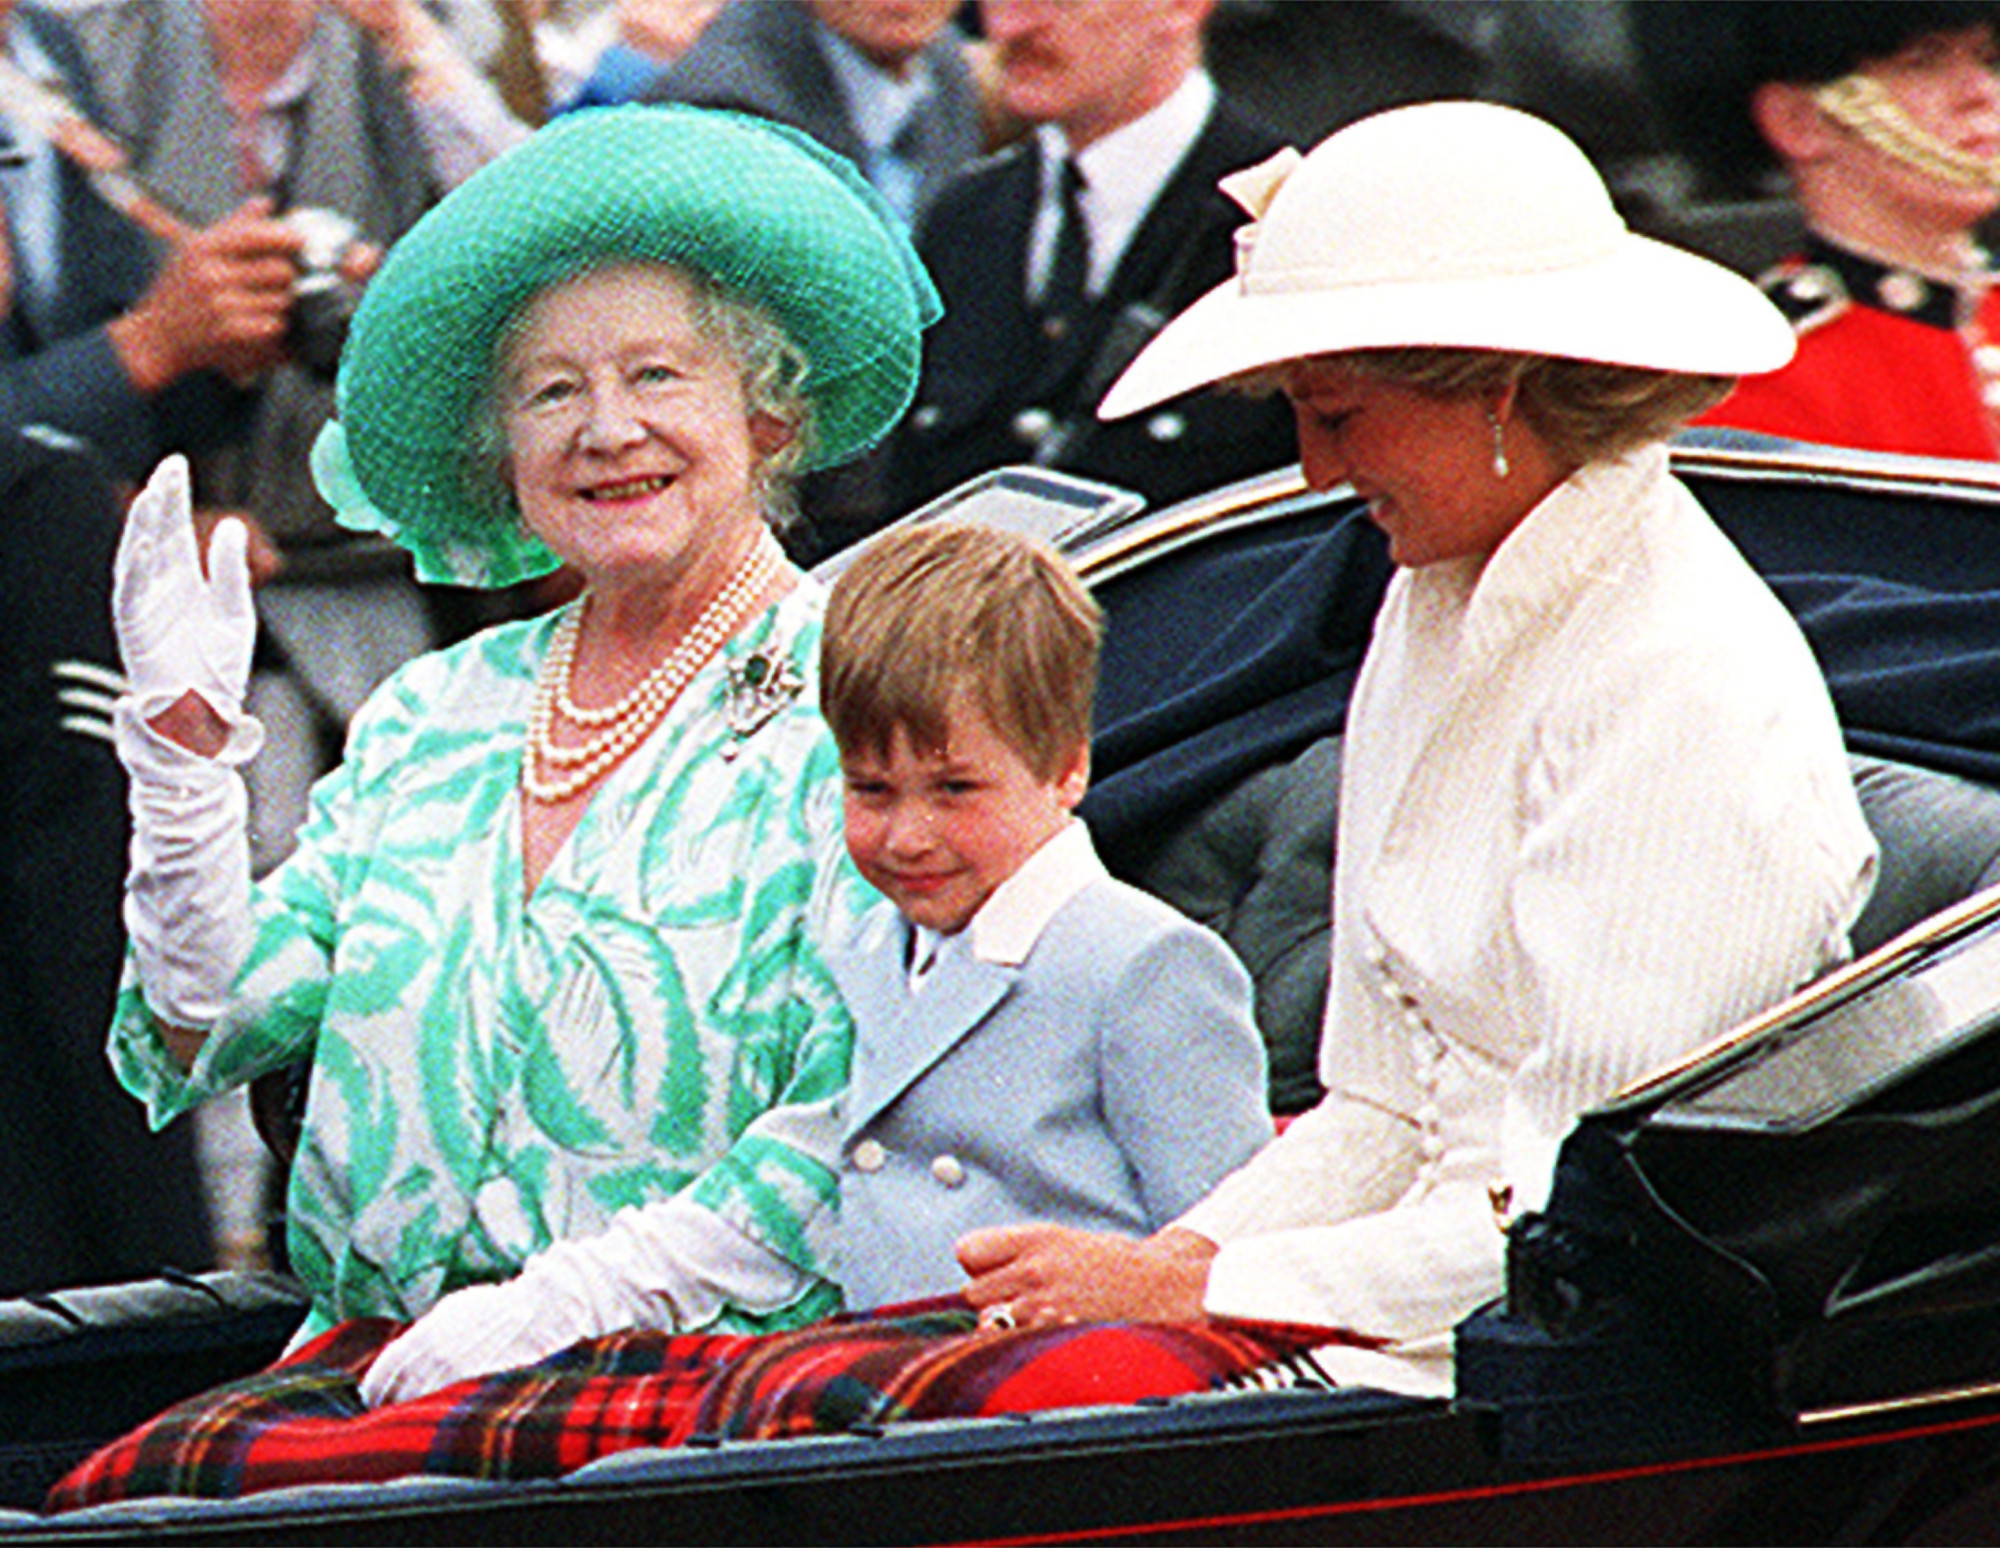 FILE - In this June 13, 1987 file photo, Britain's Queen Elizabeth rides in an open coach with her great-grandson, Prince William, and his mother Diana, Princess of Wales, during the Queen Mother's 87th birthday anniversary parade in London. Prince William is spending the latter half of his four-day stay in Japan, starting Saturday, Feb. 28, 2015 in the country's tsunami-ravaged northeast, a visit certain to draw global attention to the stories of survival and continuing suffering in the region. Memories of William's mother, who died in 1997, are everywhere. The media in Japan, a culture that traditionally values male heirs, have been referring to him as "Diana's first-born son," as though that was more important than his being second in line to the throne. (AP Photo/Gill Allen, File)